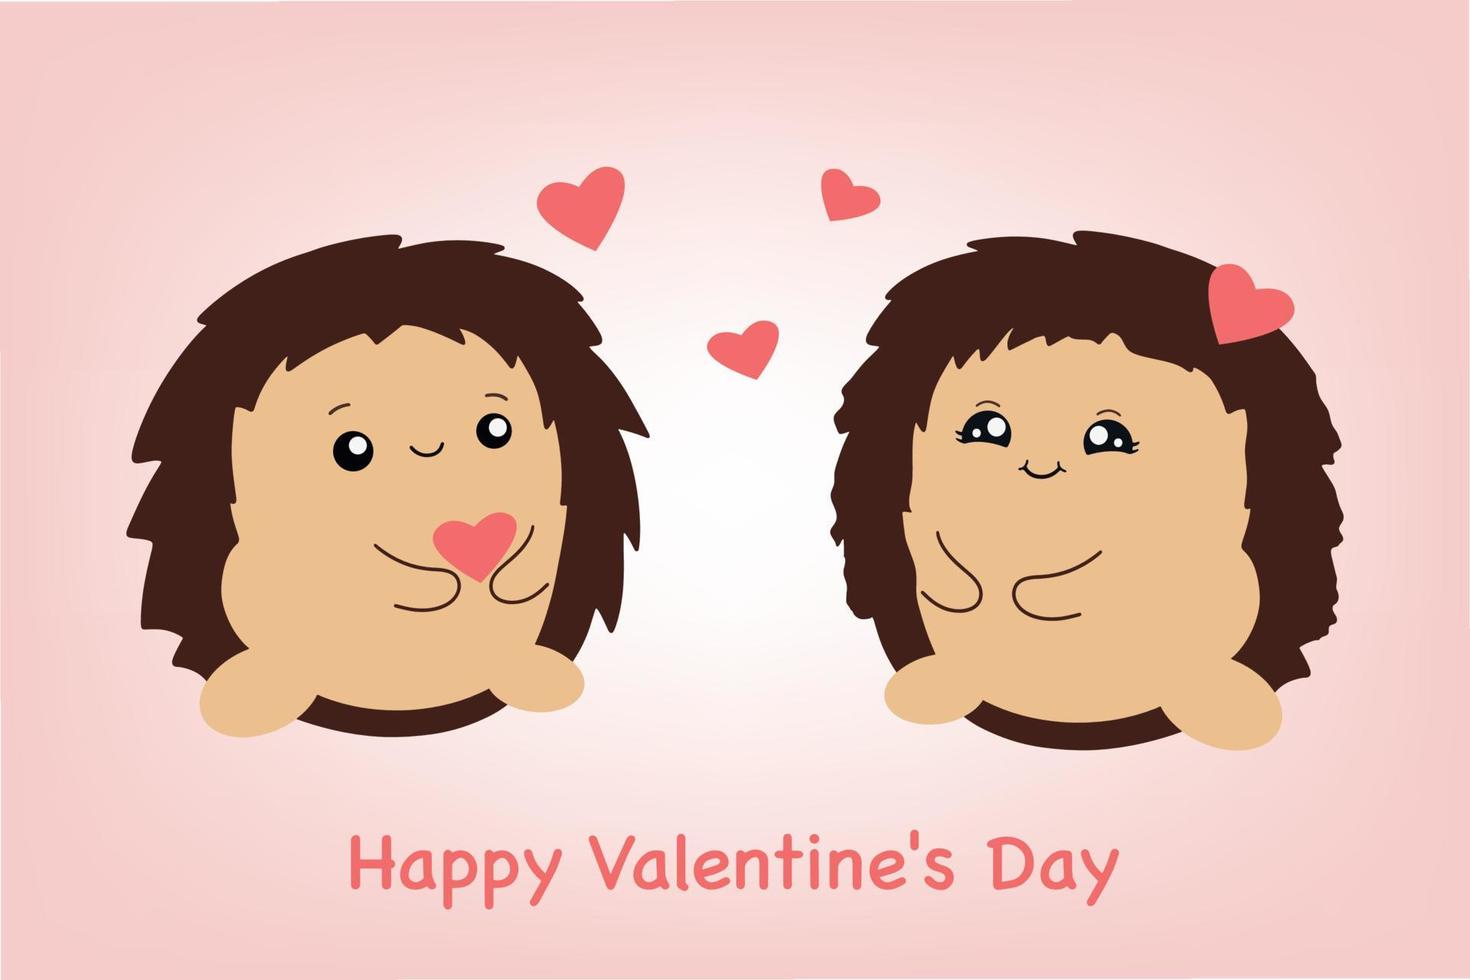 Cute hedgehogs. Valentine with lovers. Vector illustration isolated on pink background